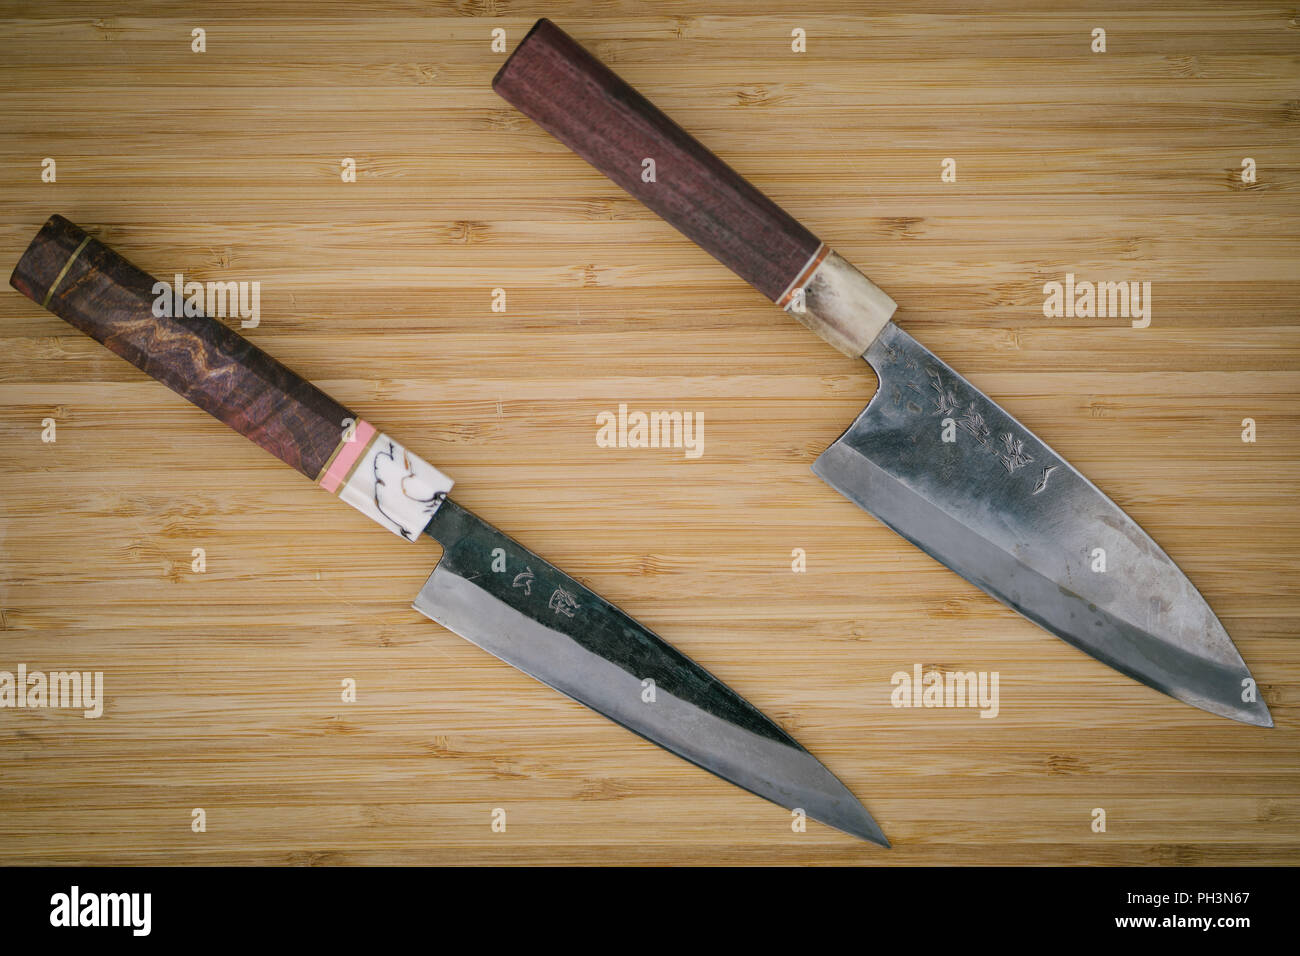 Japanese Handcrafted Sharp Damascus Steel Knives Cutting Board Stock Photo